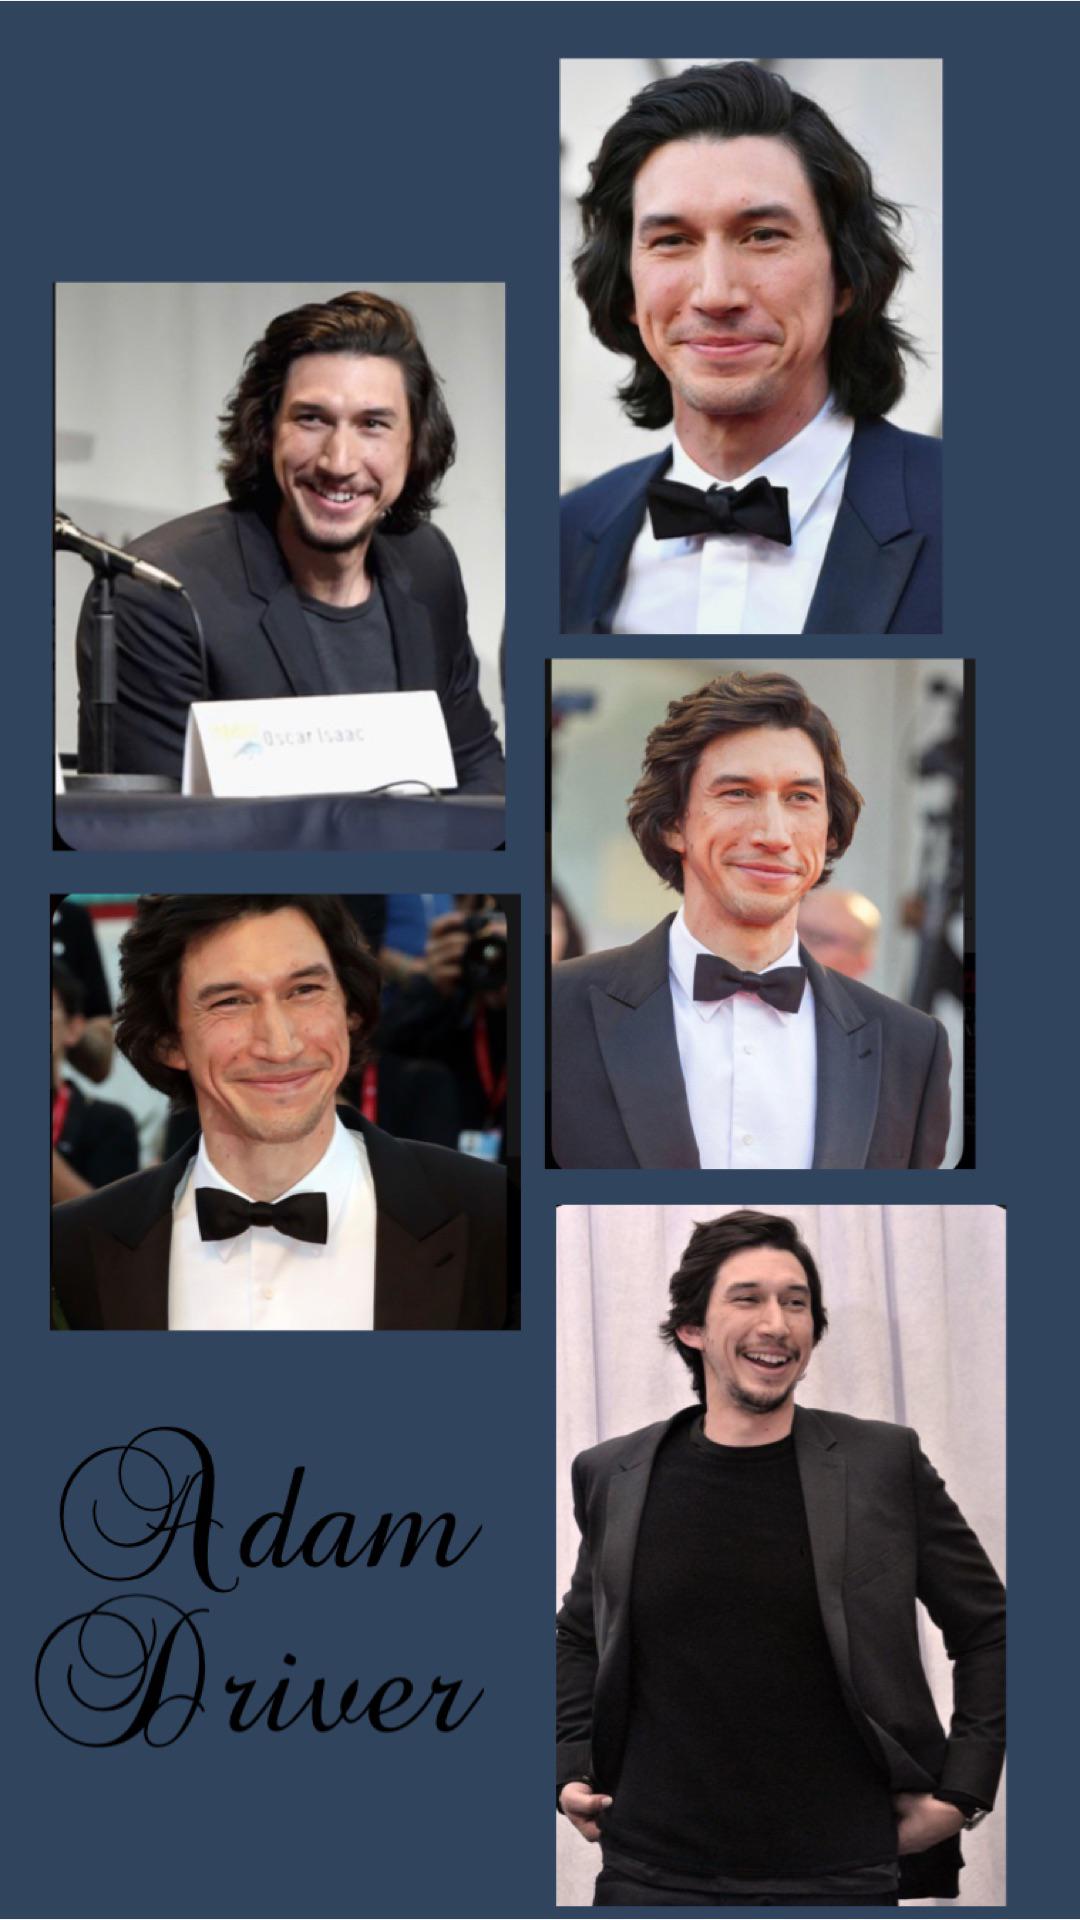 here's a wallpaper of Adam driver smiling:)